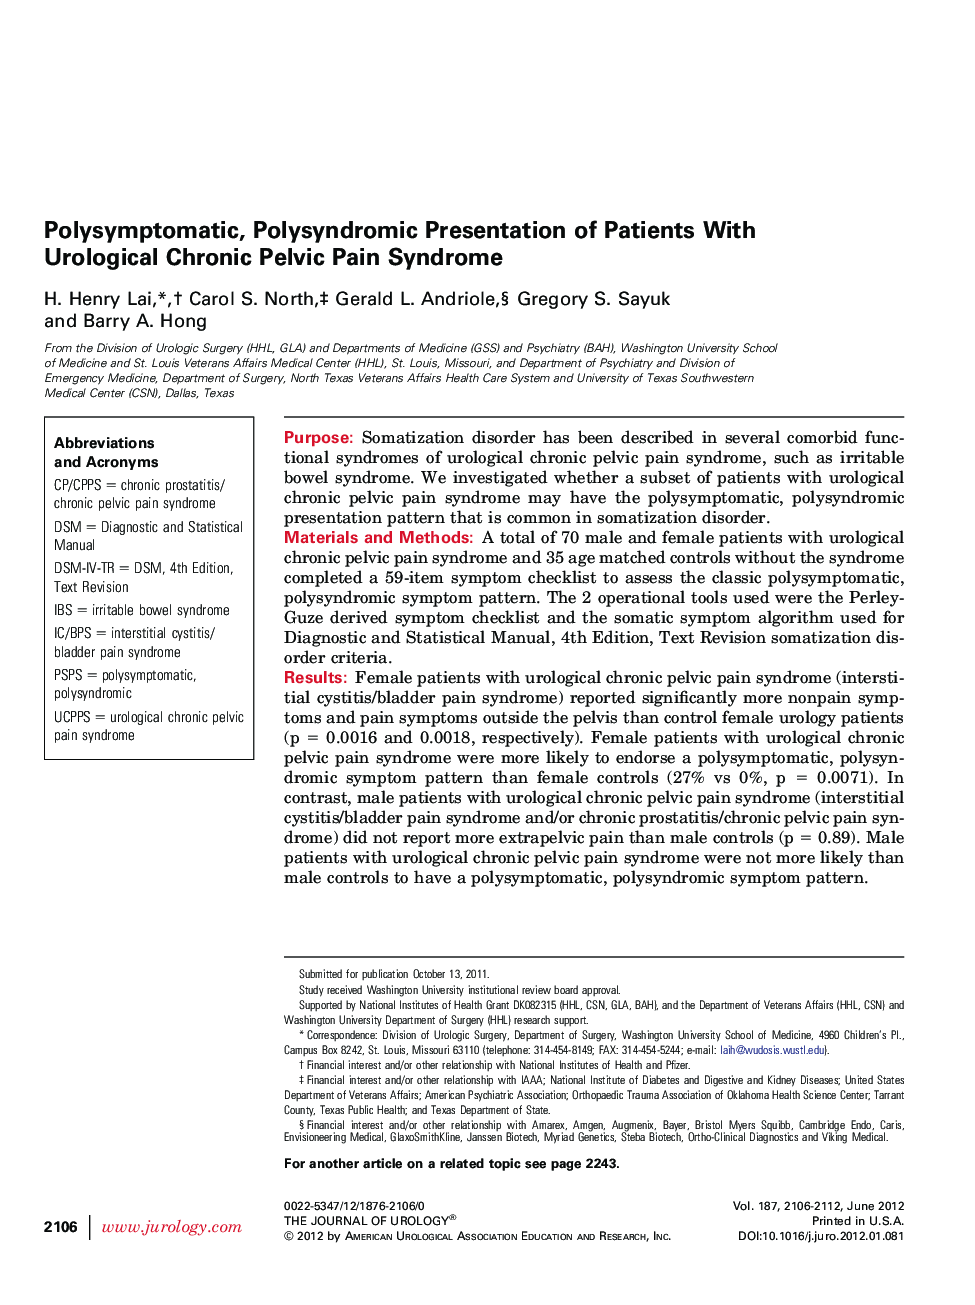 Polysymptomatic, Polysyndromic Presentation of Patients With Urological Chronic Pelvic Pain Syndrome 